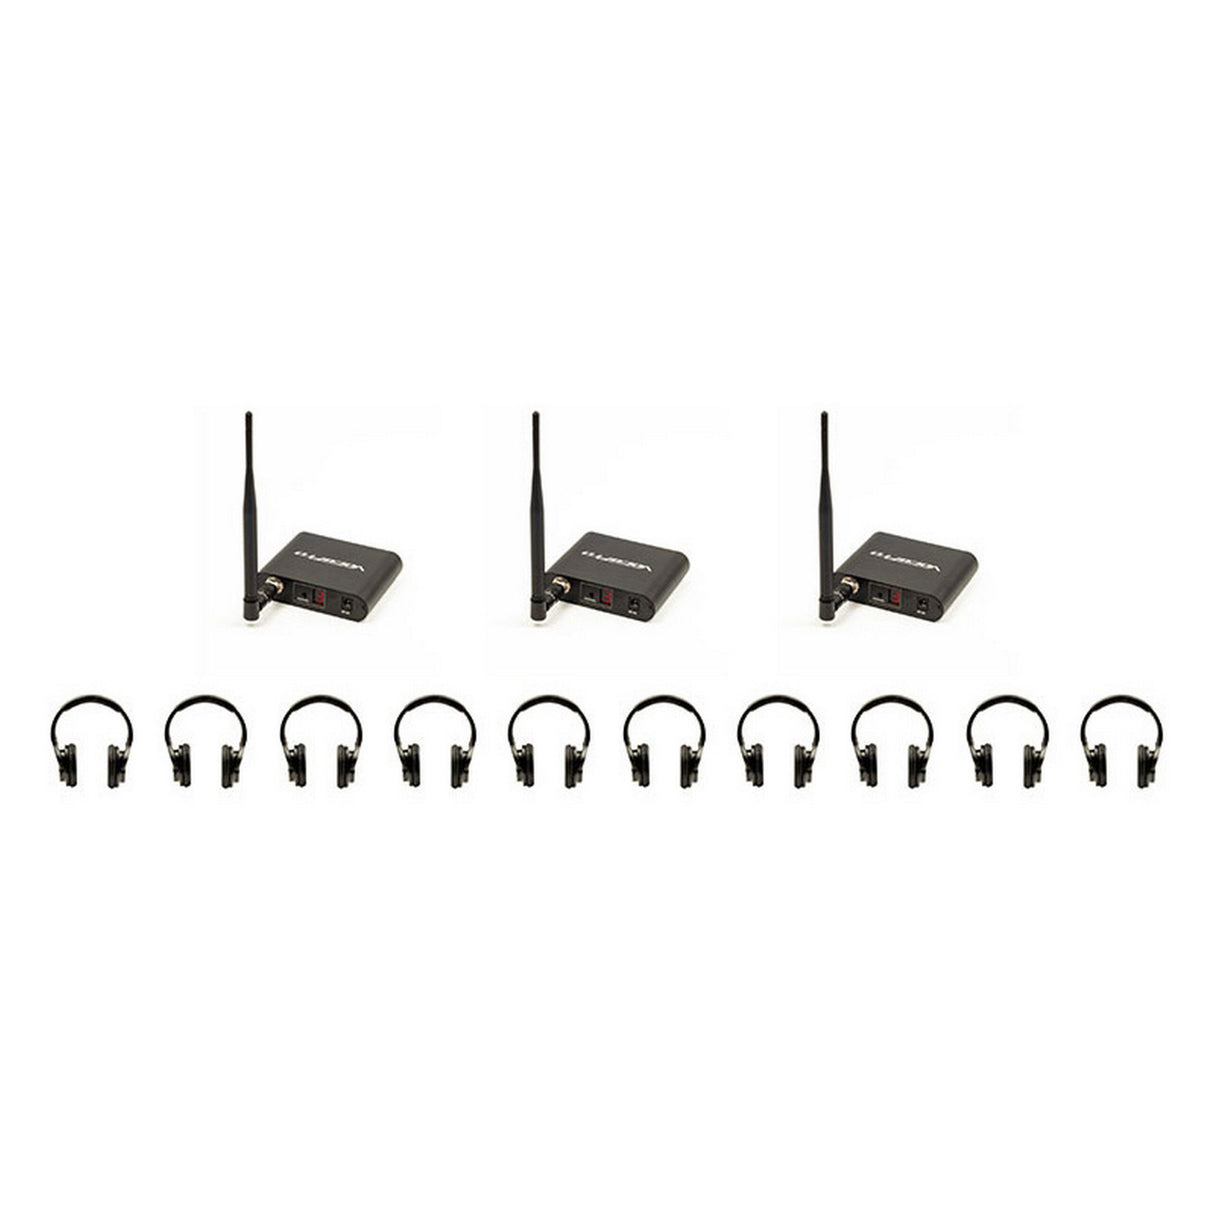 VocoPro Silent Disco 310 Package with 3 Transmitters and 10 Wireless LED Headphones